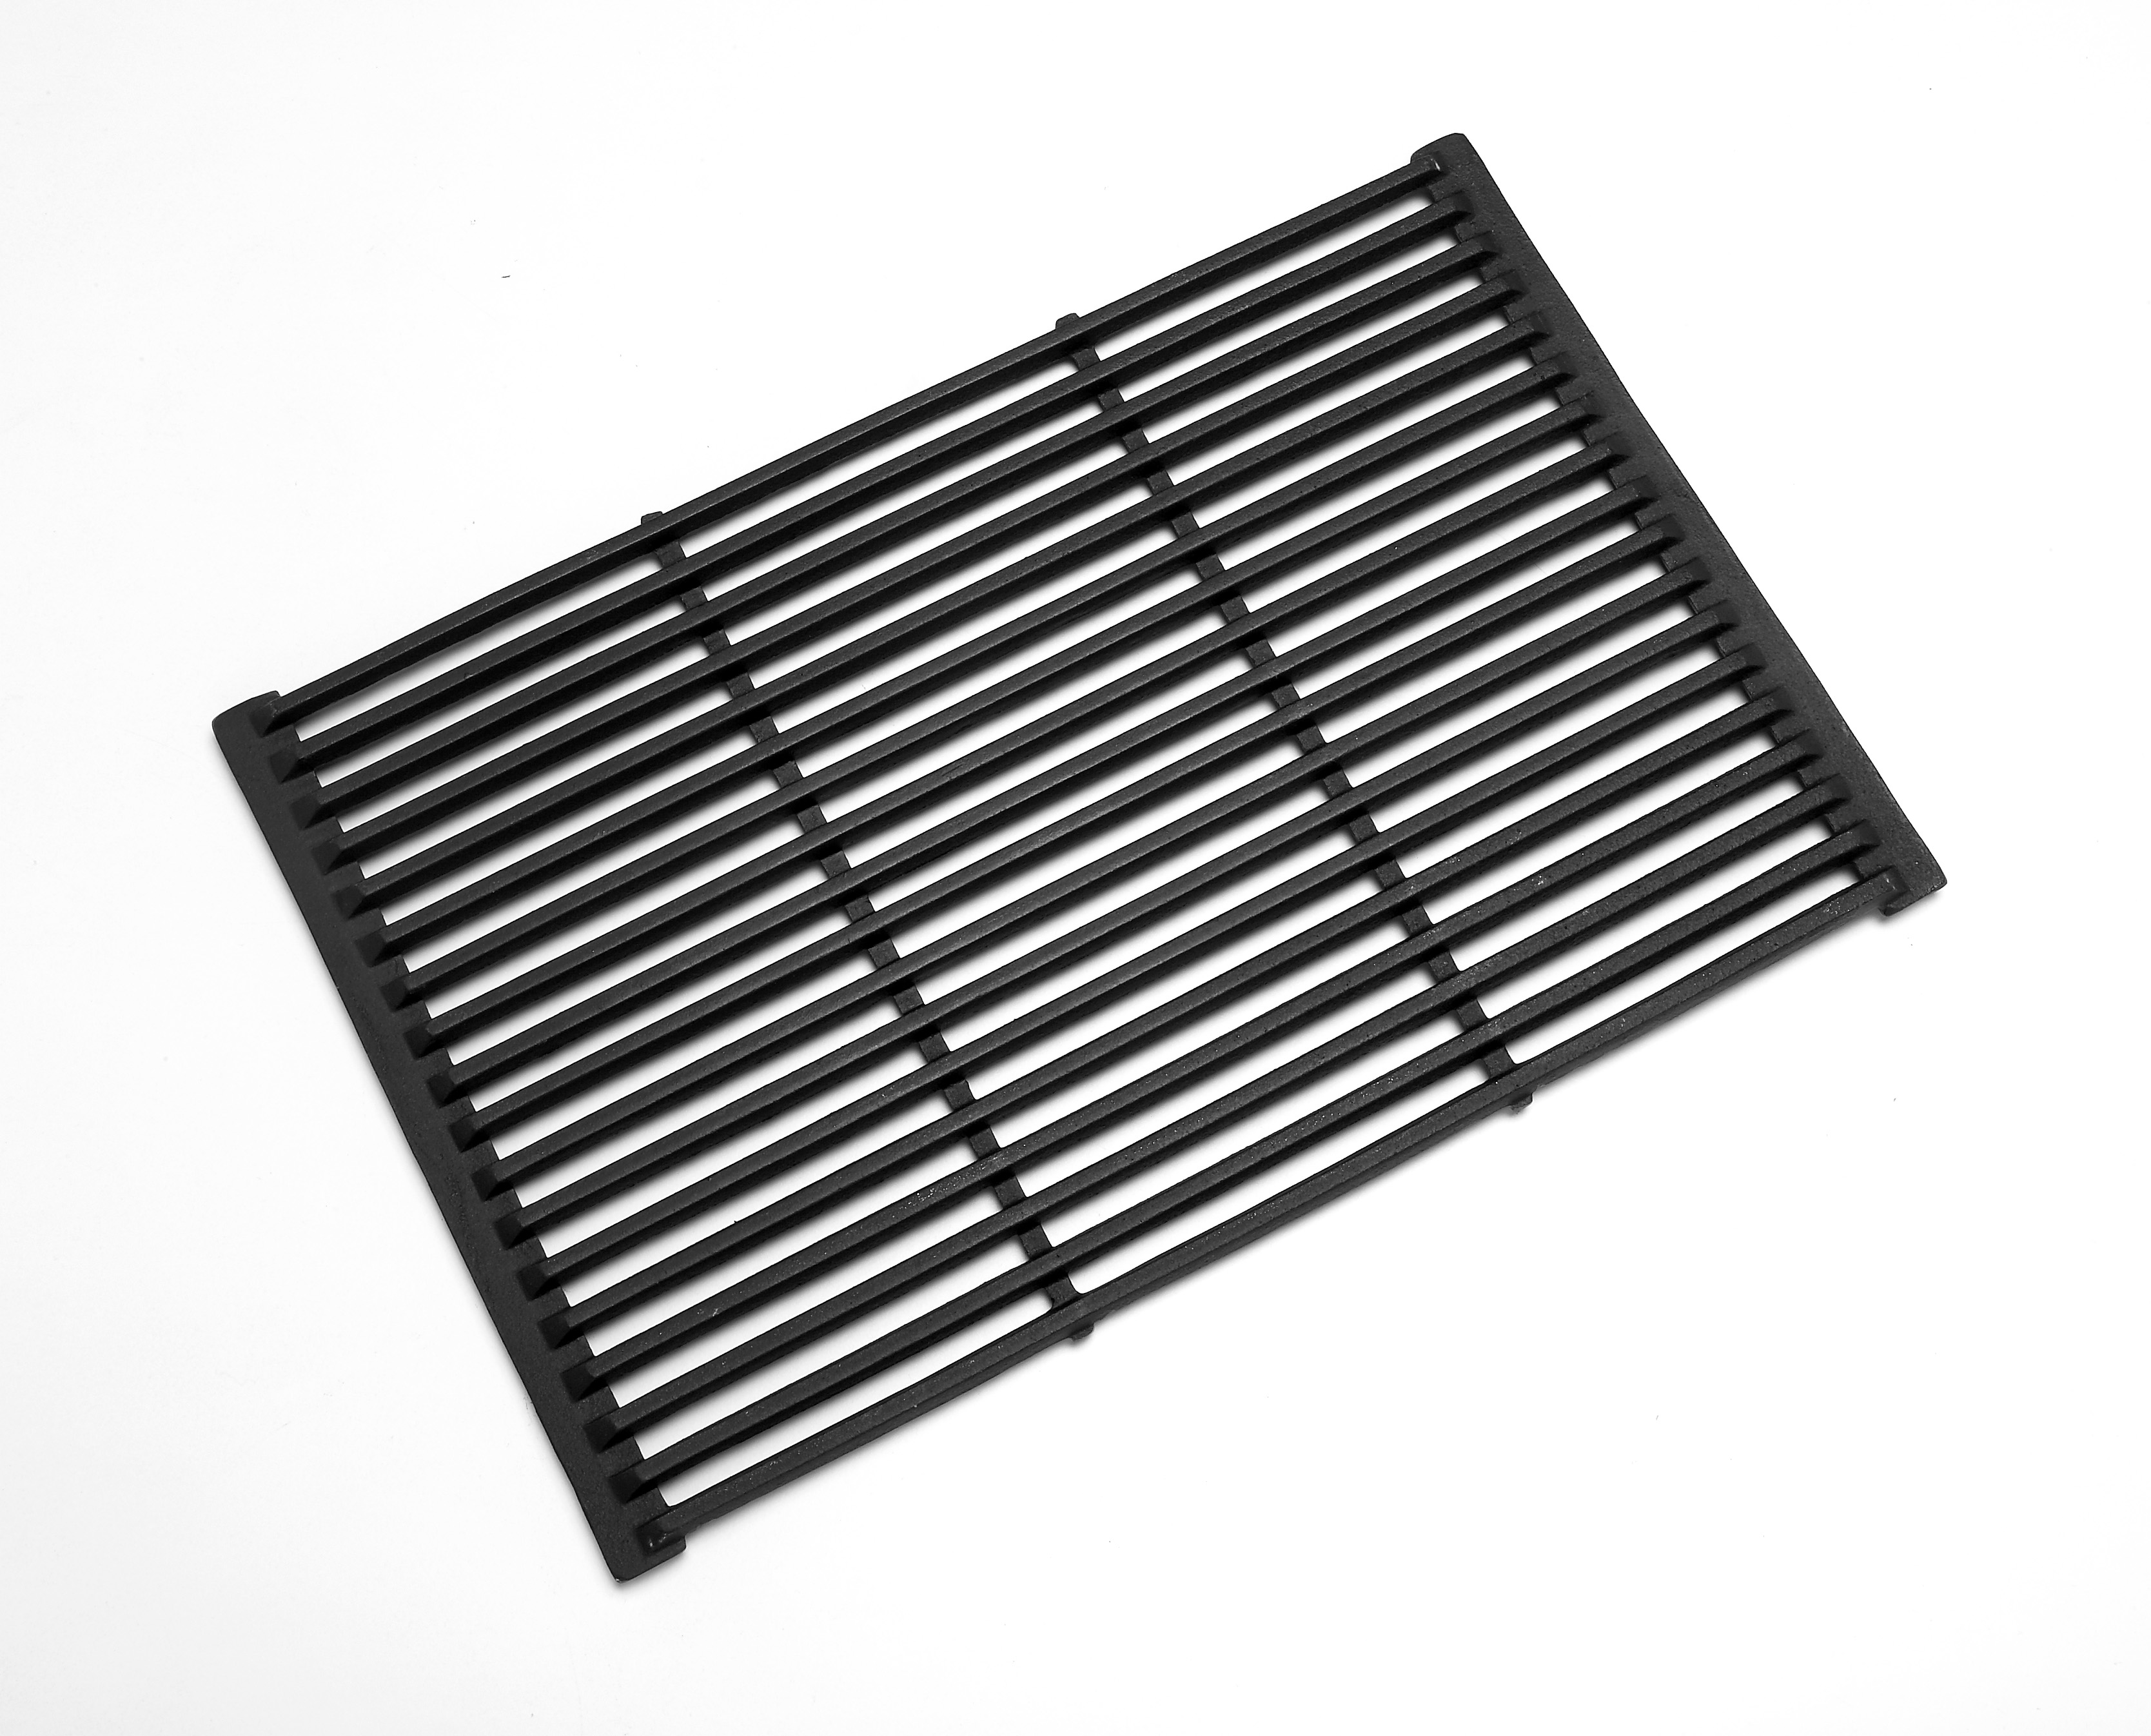 320mm x 485mm grill - ceramic coated, to suit 3B & 6B BBQ